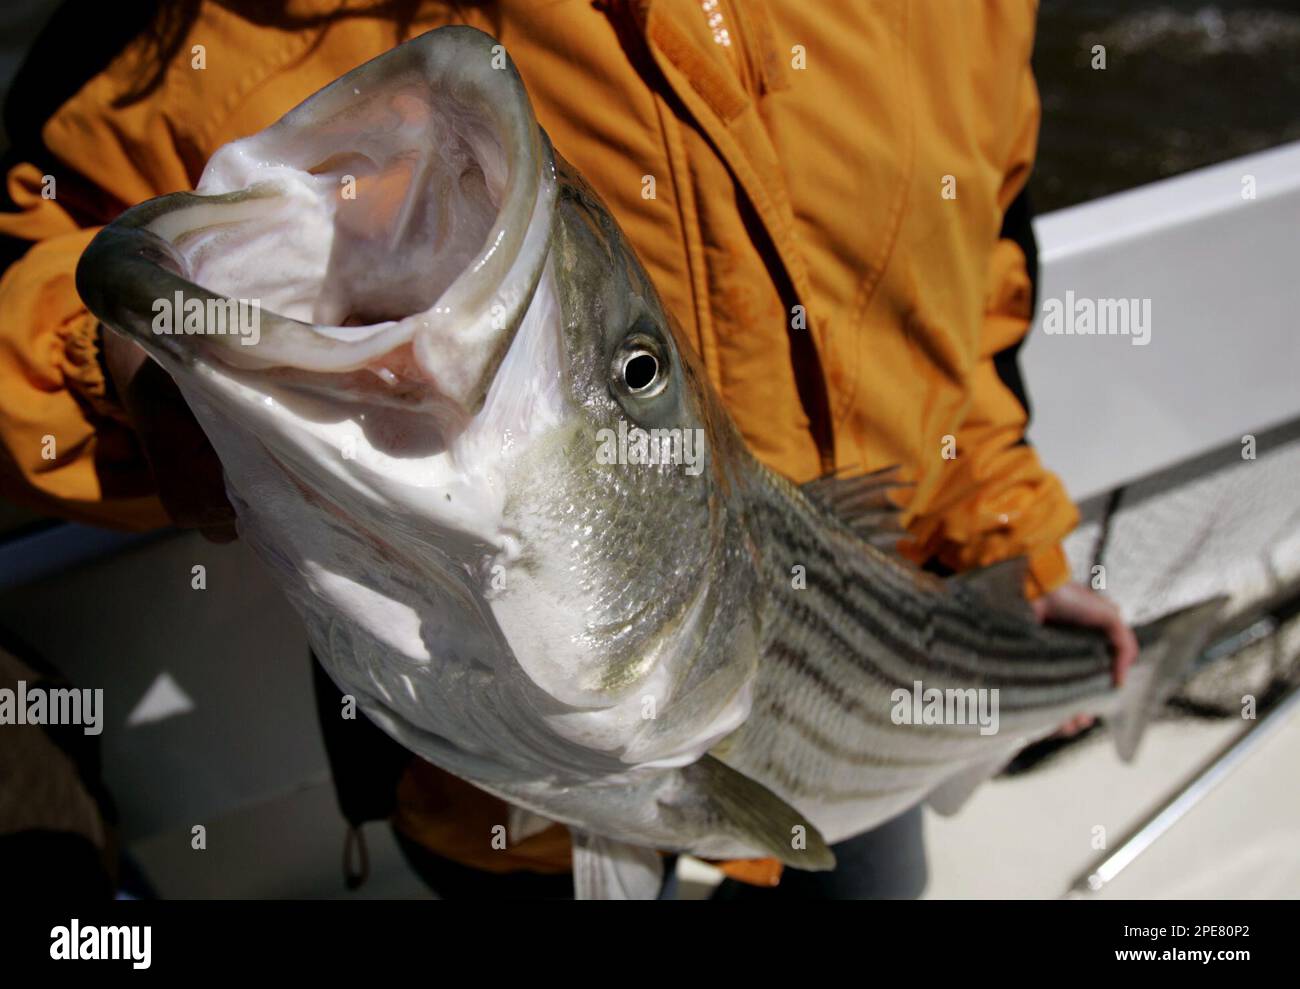 A 36-inch rockfish, better know as a striped bass, is readied to be put  back in the Chesapeake Bay after being caught Wednesday, April 13, 2005,  off Chesapeake Beach, Md. As the